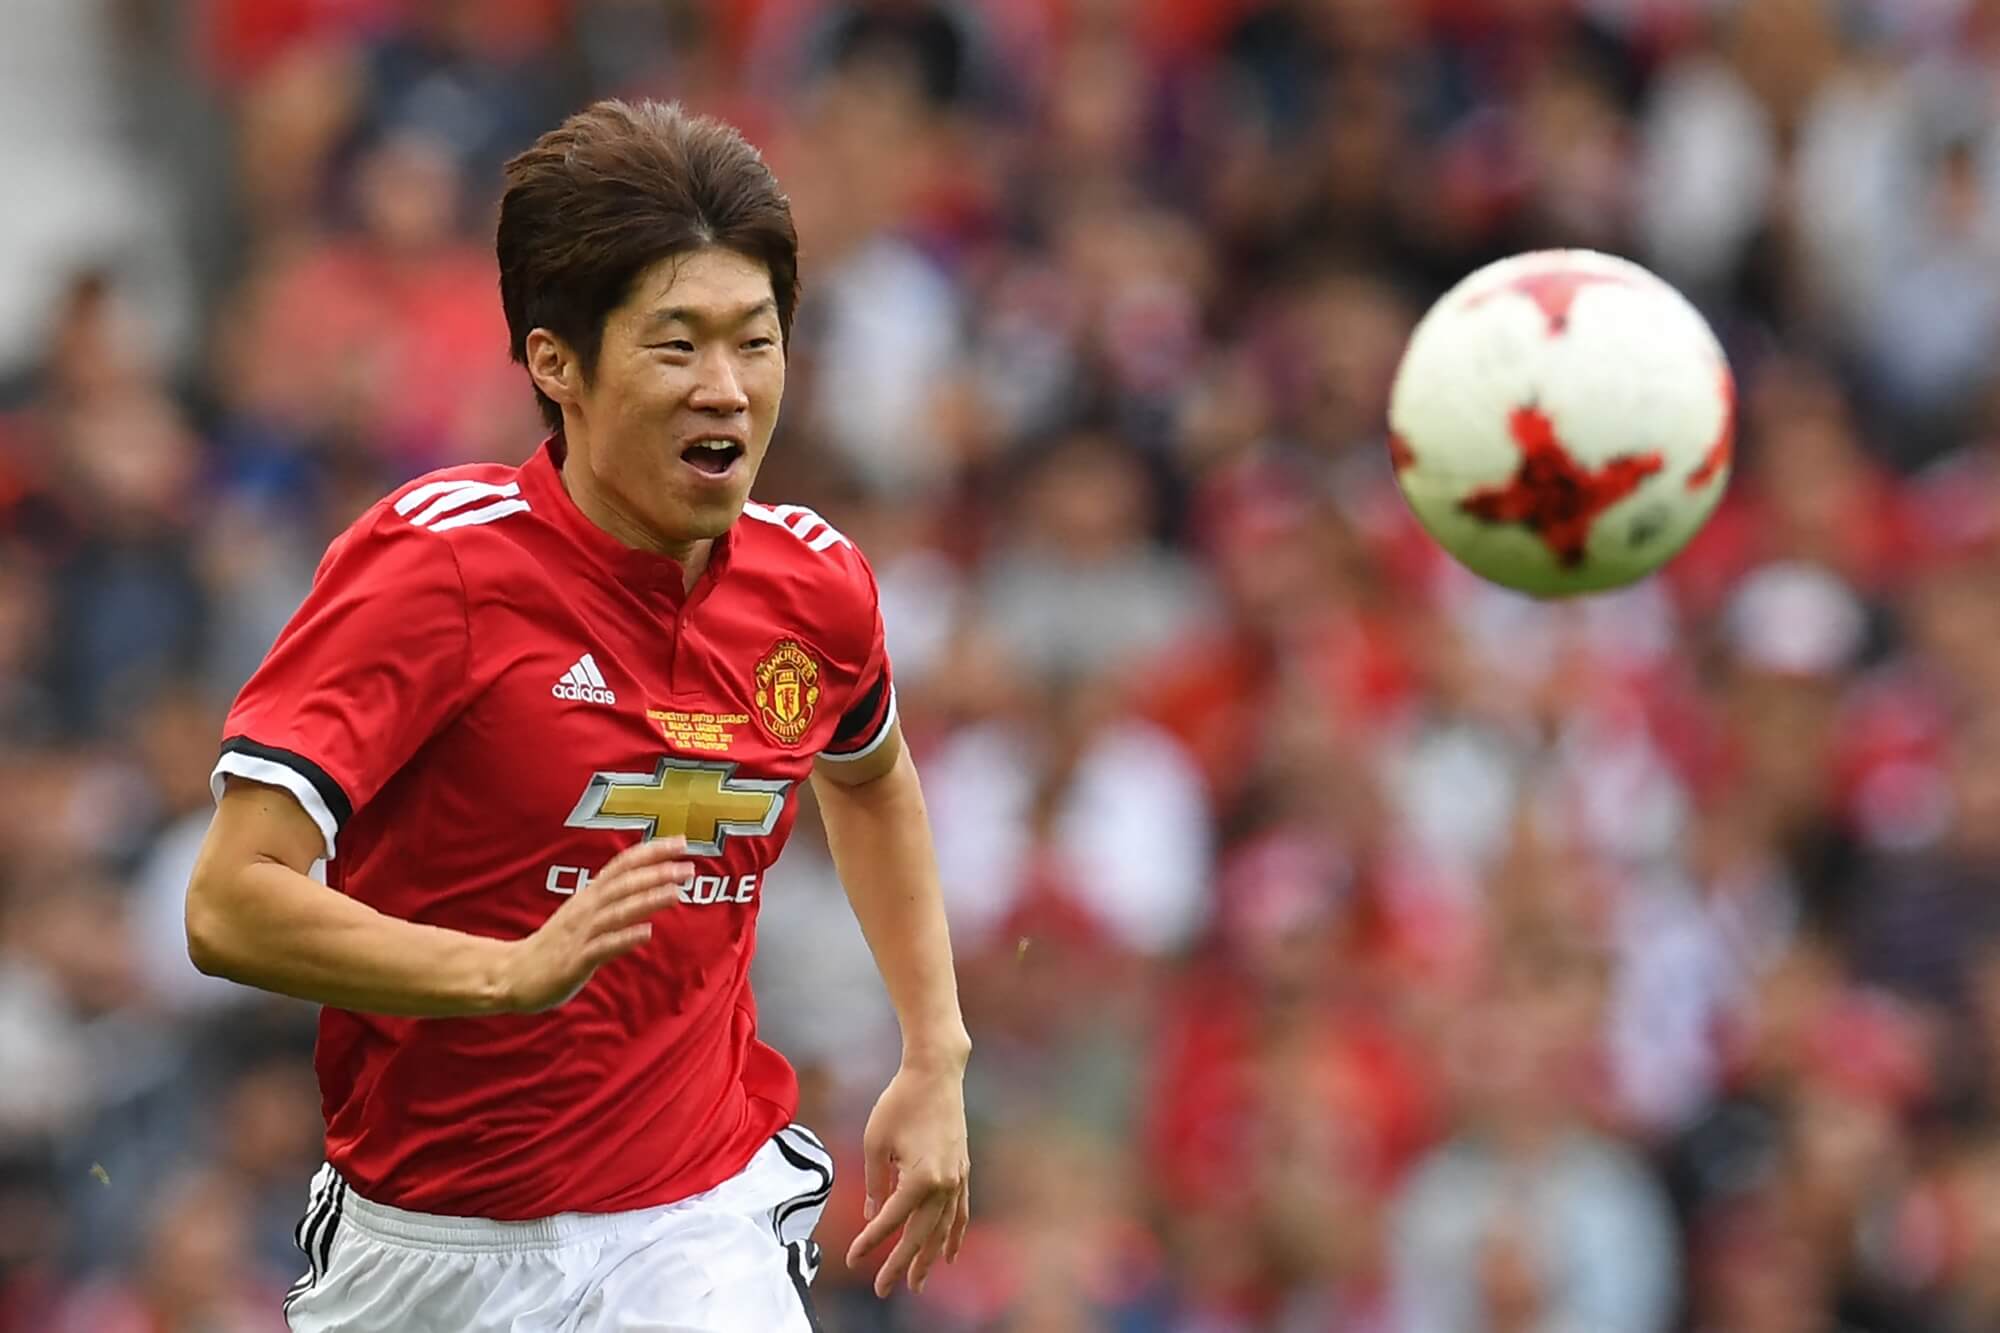 How a degree in sports management helped Park Ji-sung off the pitch